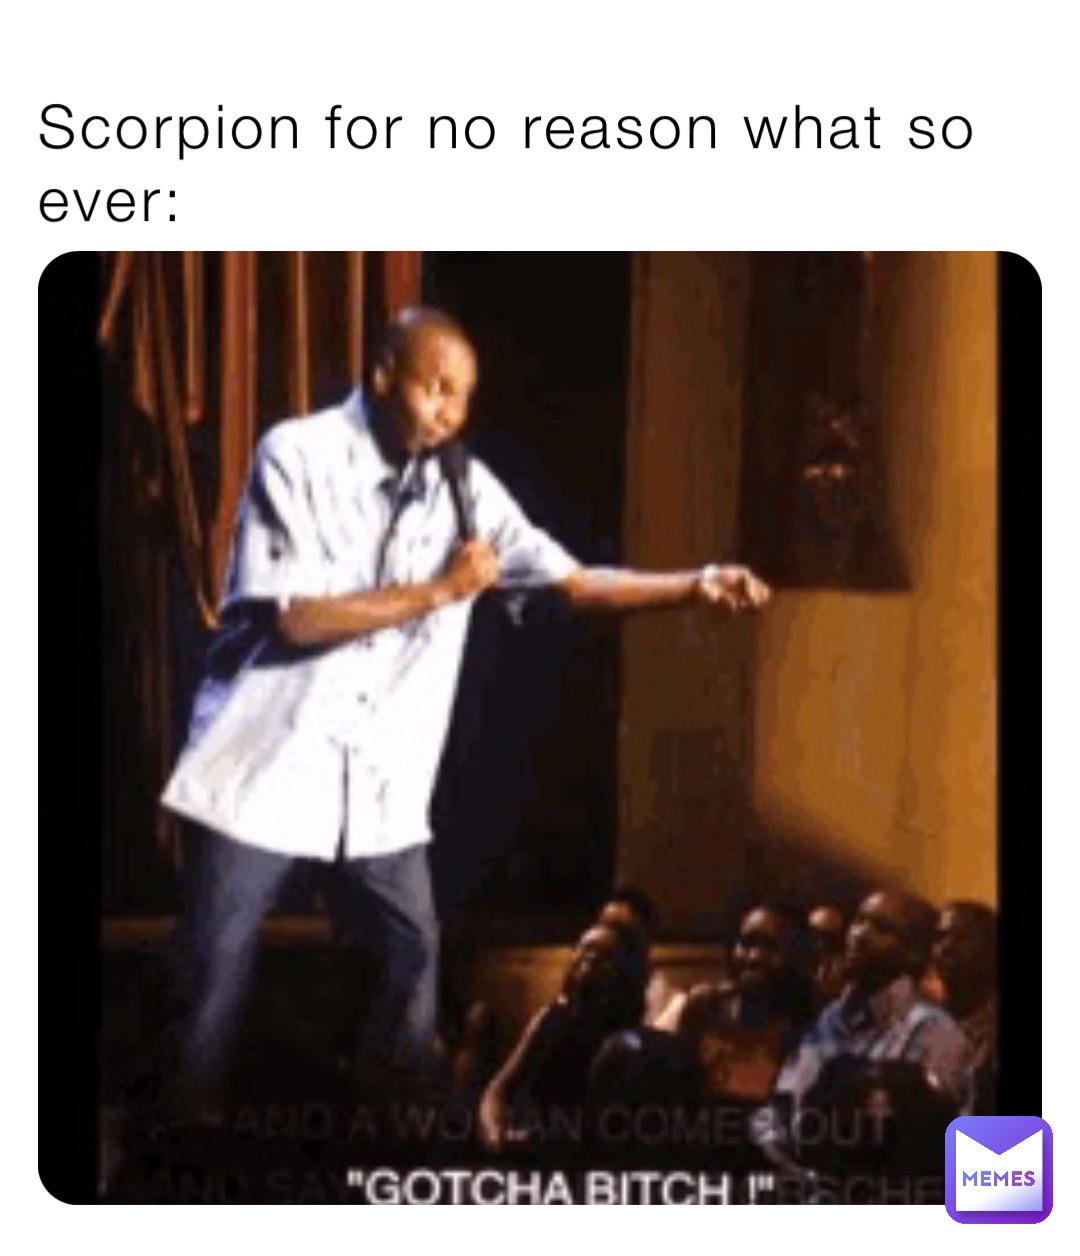 Scorpion for no reason what so ever: